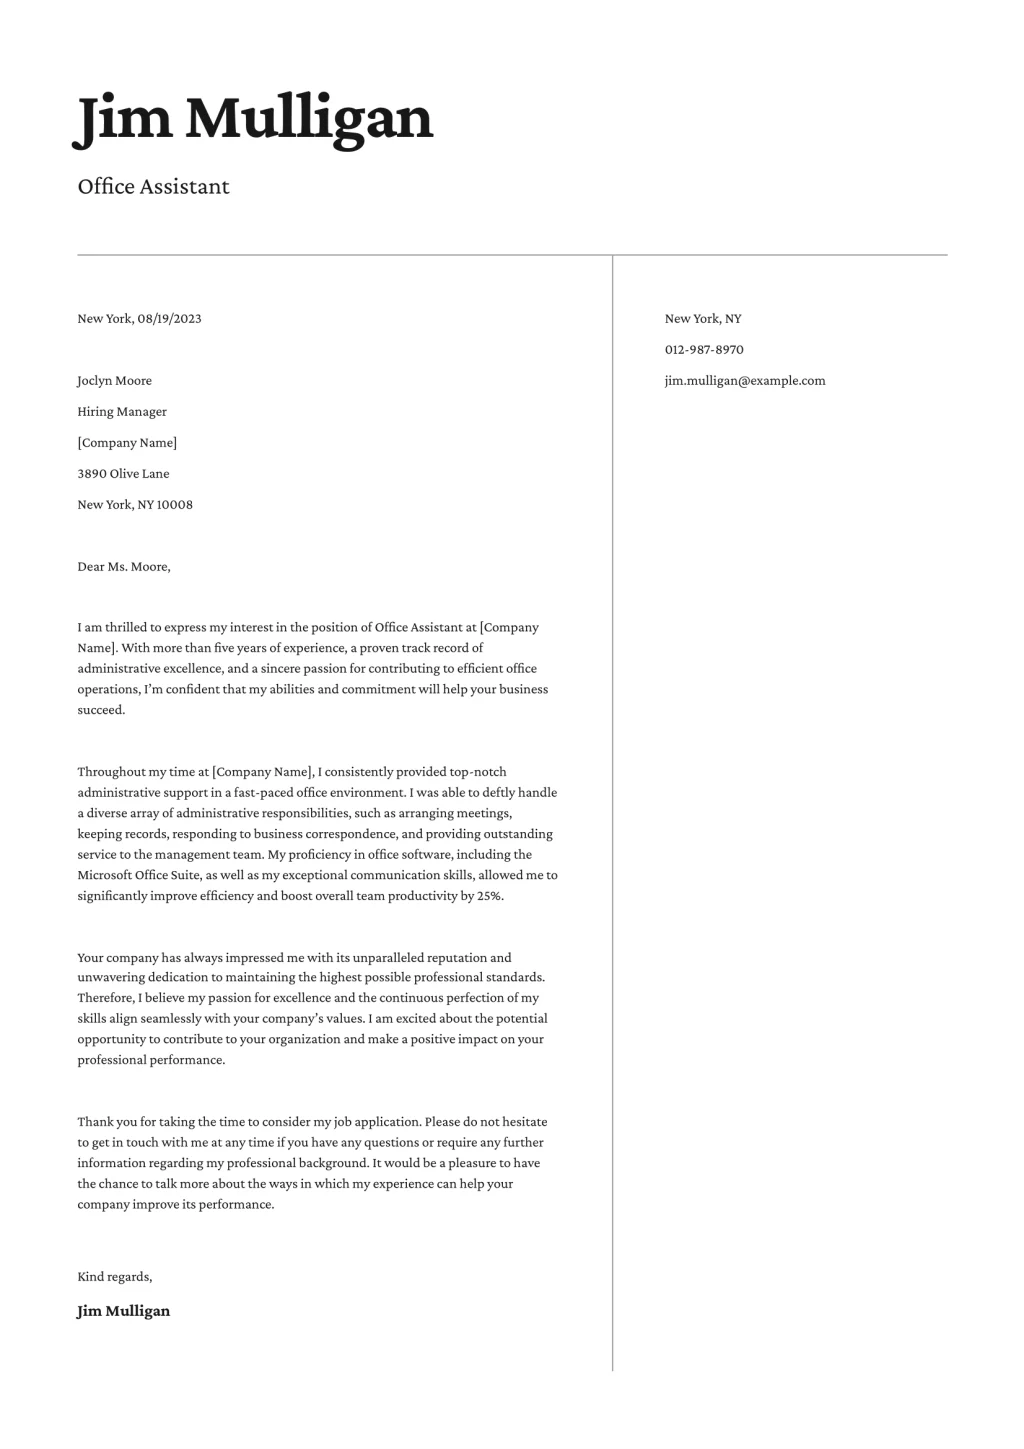 Office Assistant Cover Letter w/ Example: How to Create One